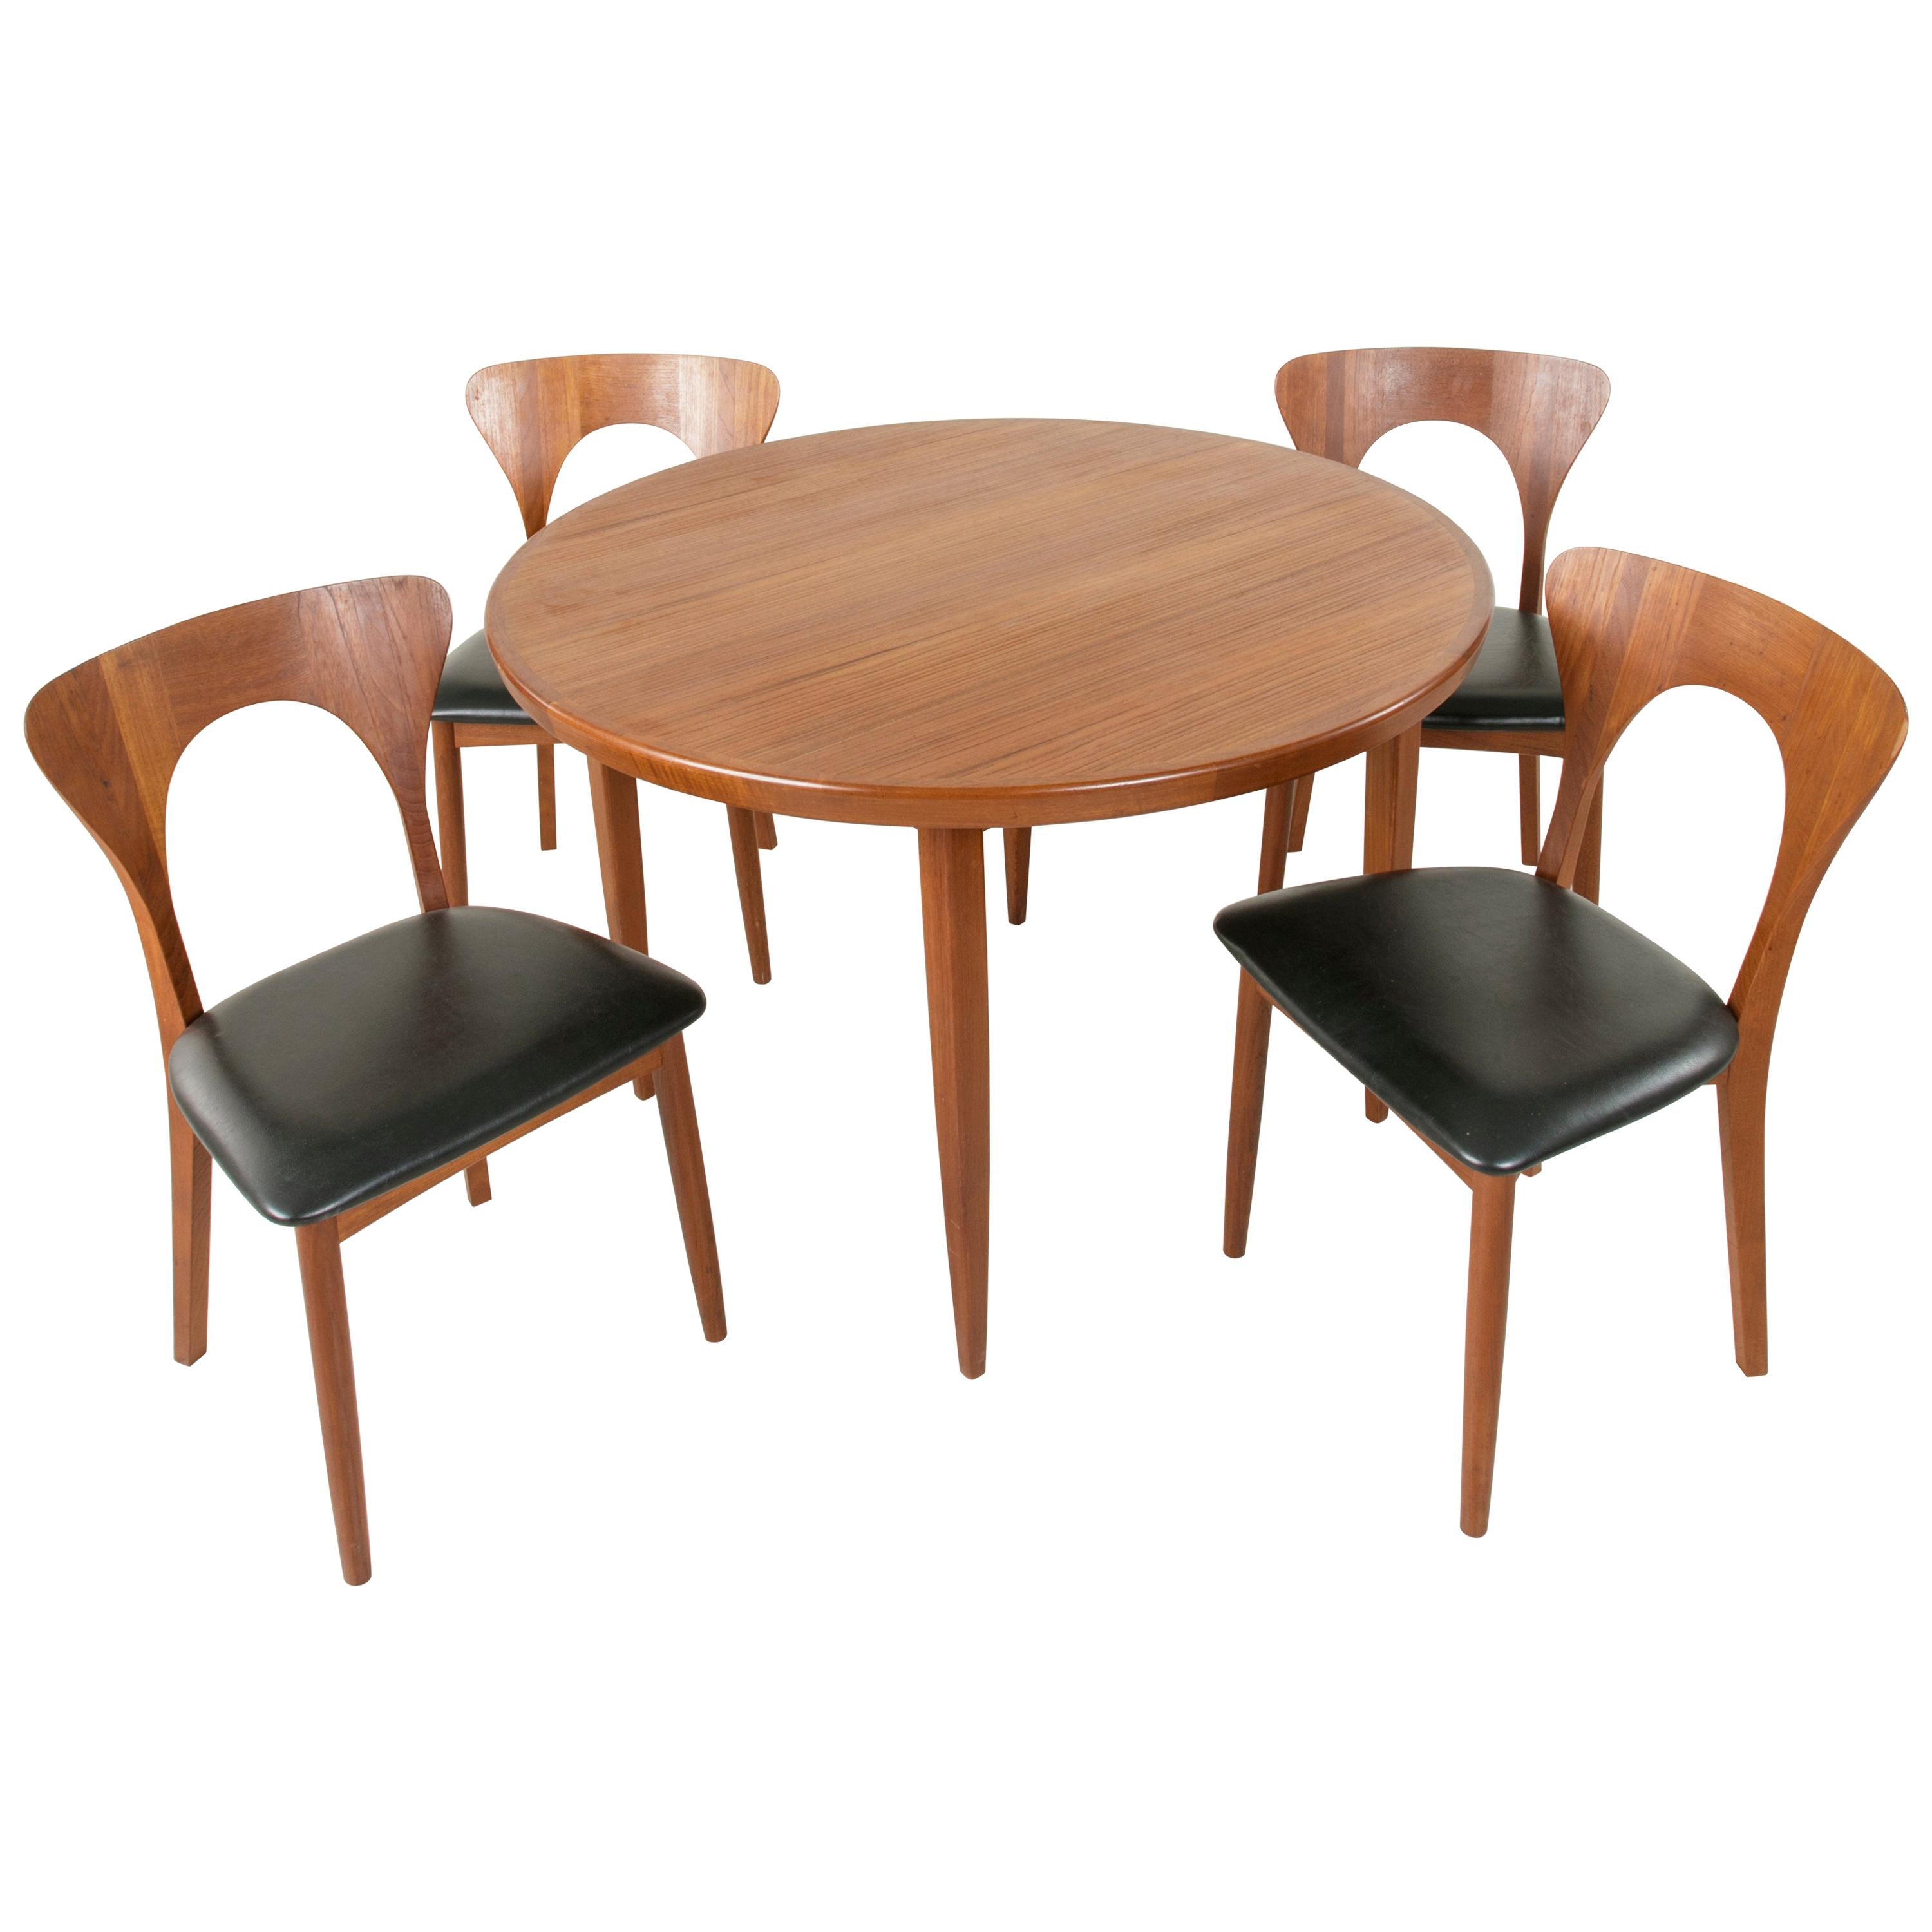 Midcentury Danish Round Teak Table and Four Chairs by Niels Koefoed, Hornslet